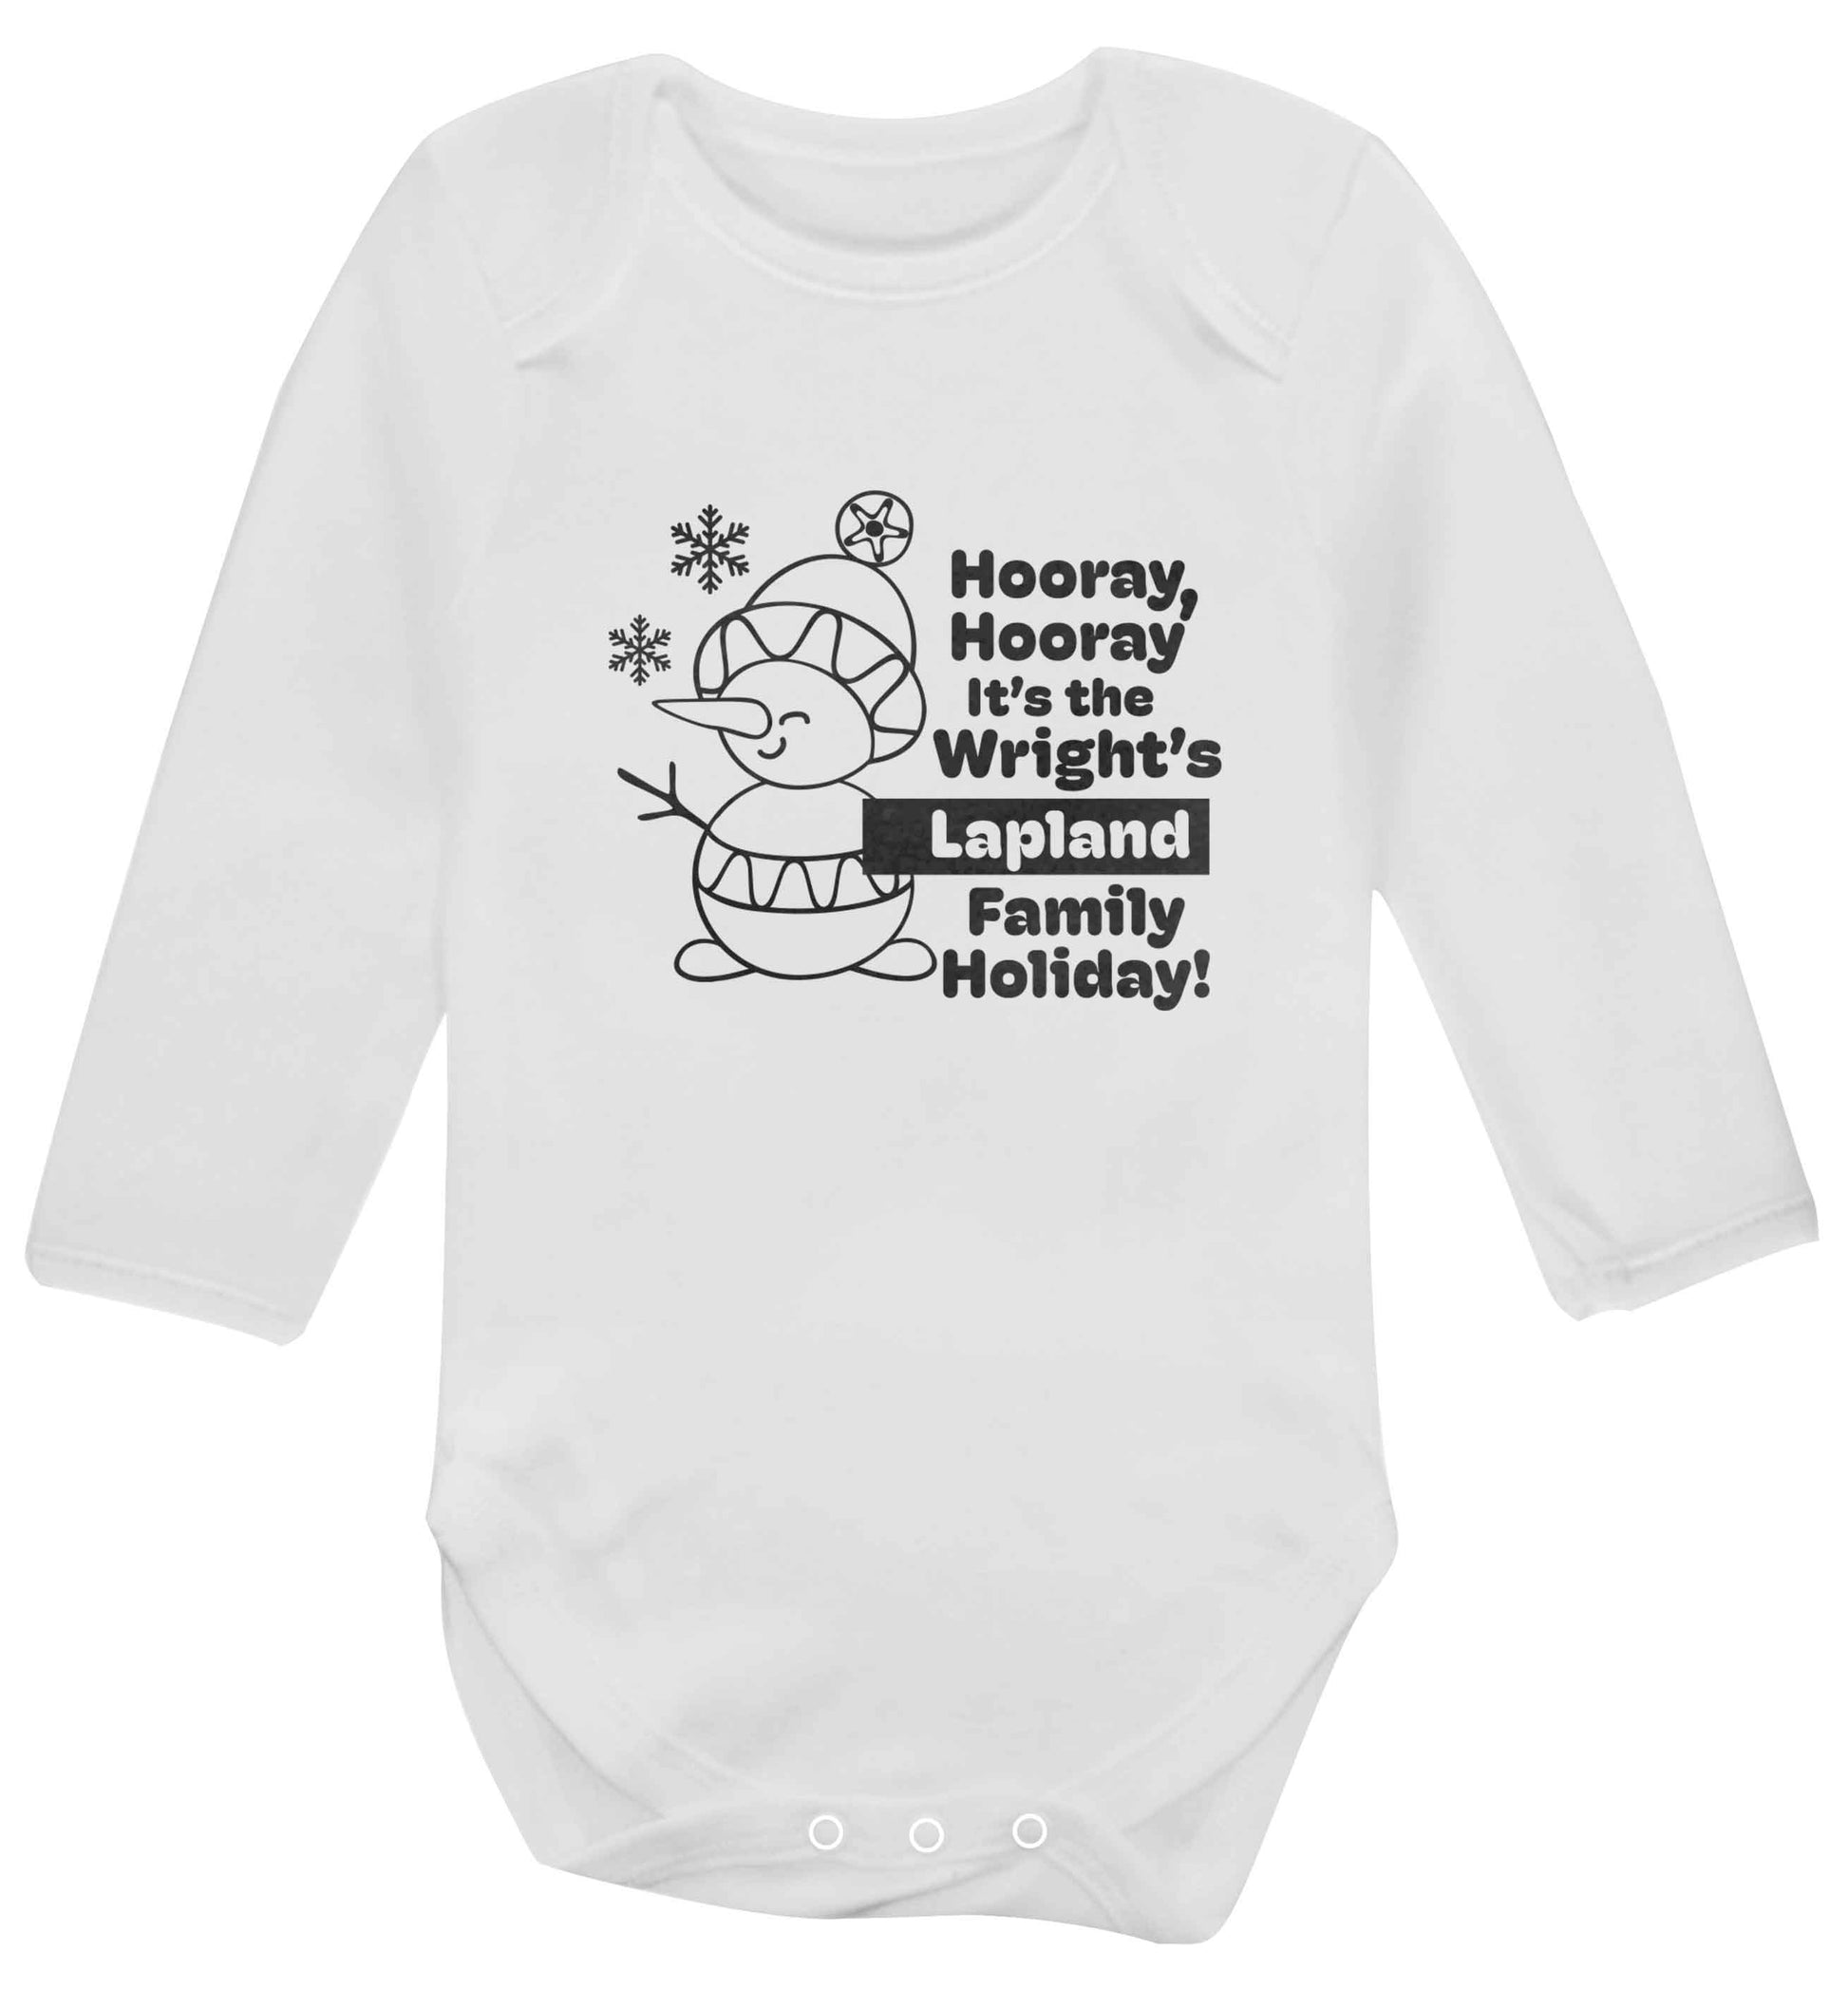 Hooray it's the personalised Lapland holiday! baby vest long sleeved white 6-12 months